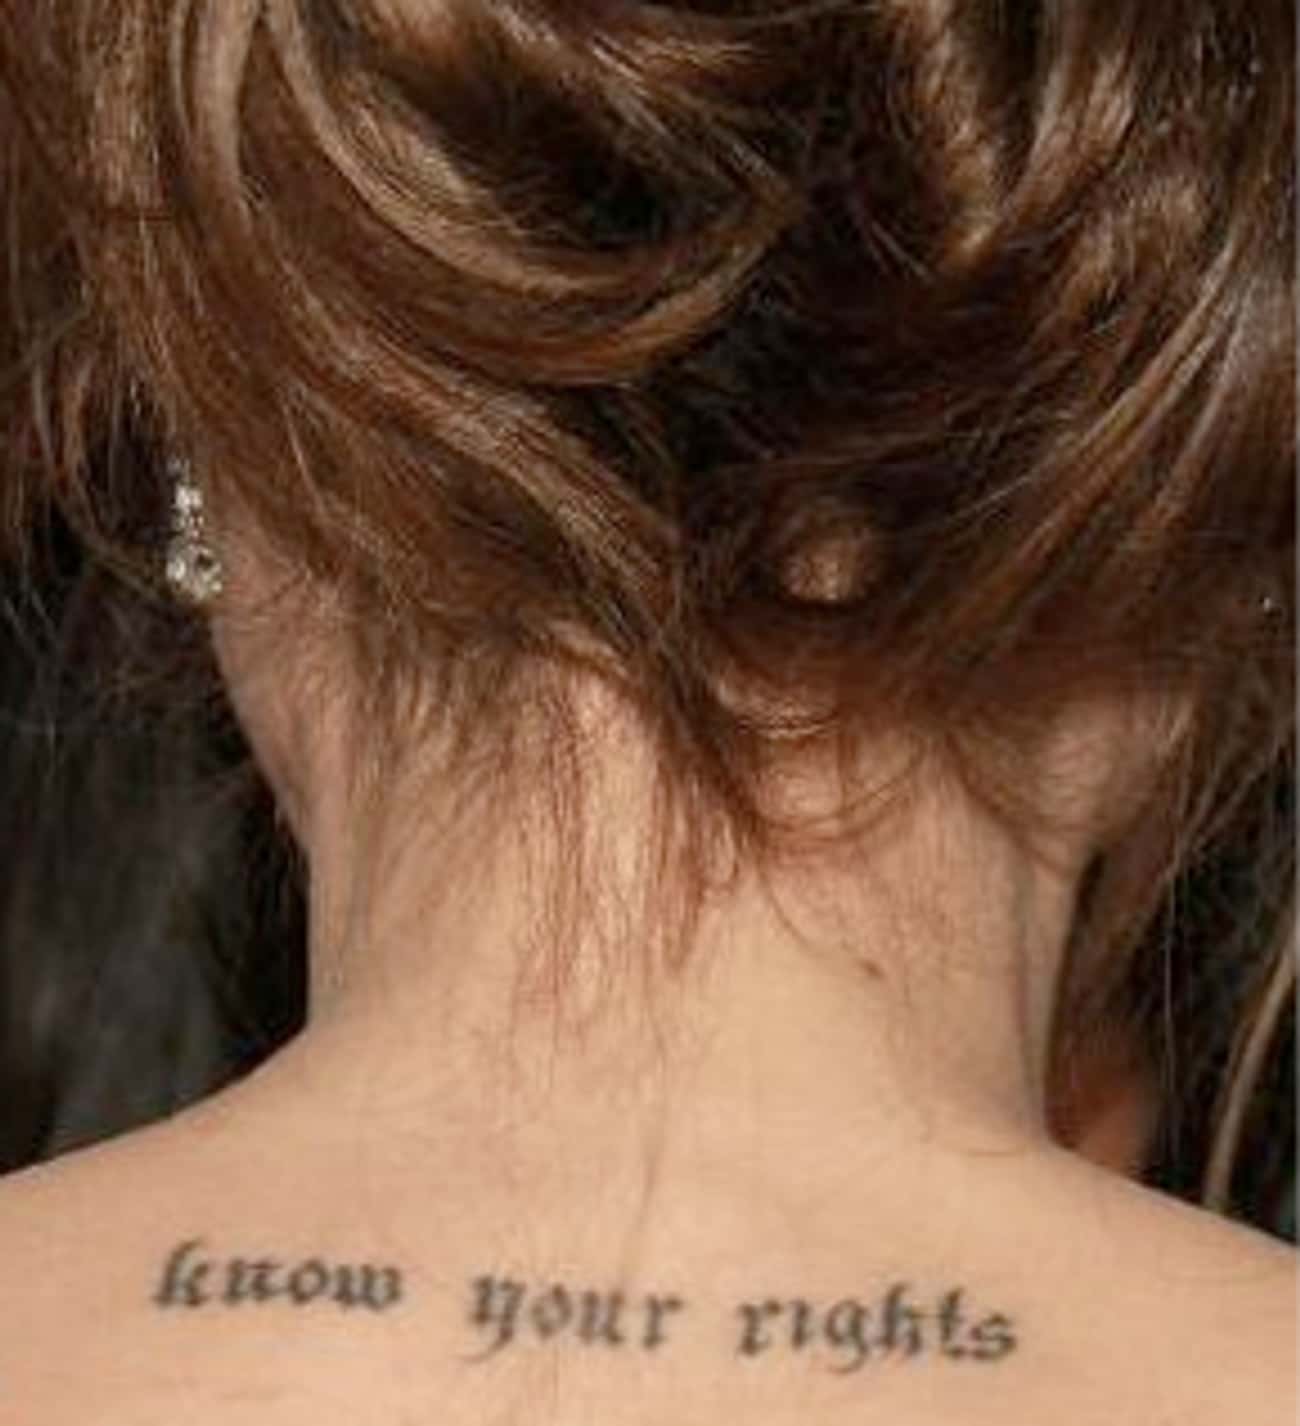 Know Your Rights Tattoo